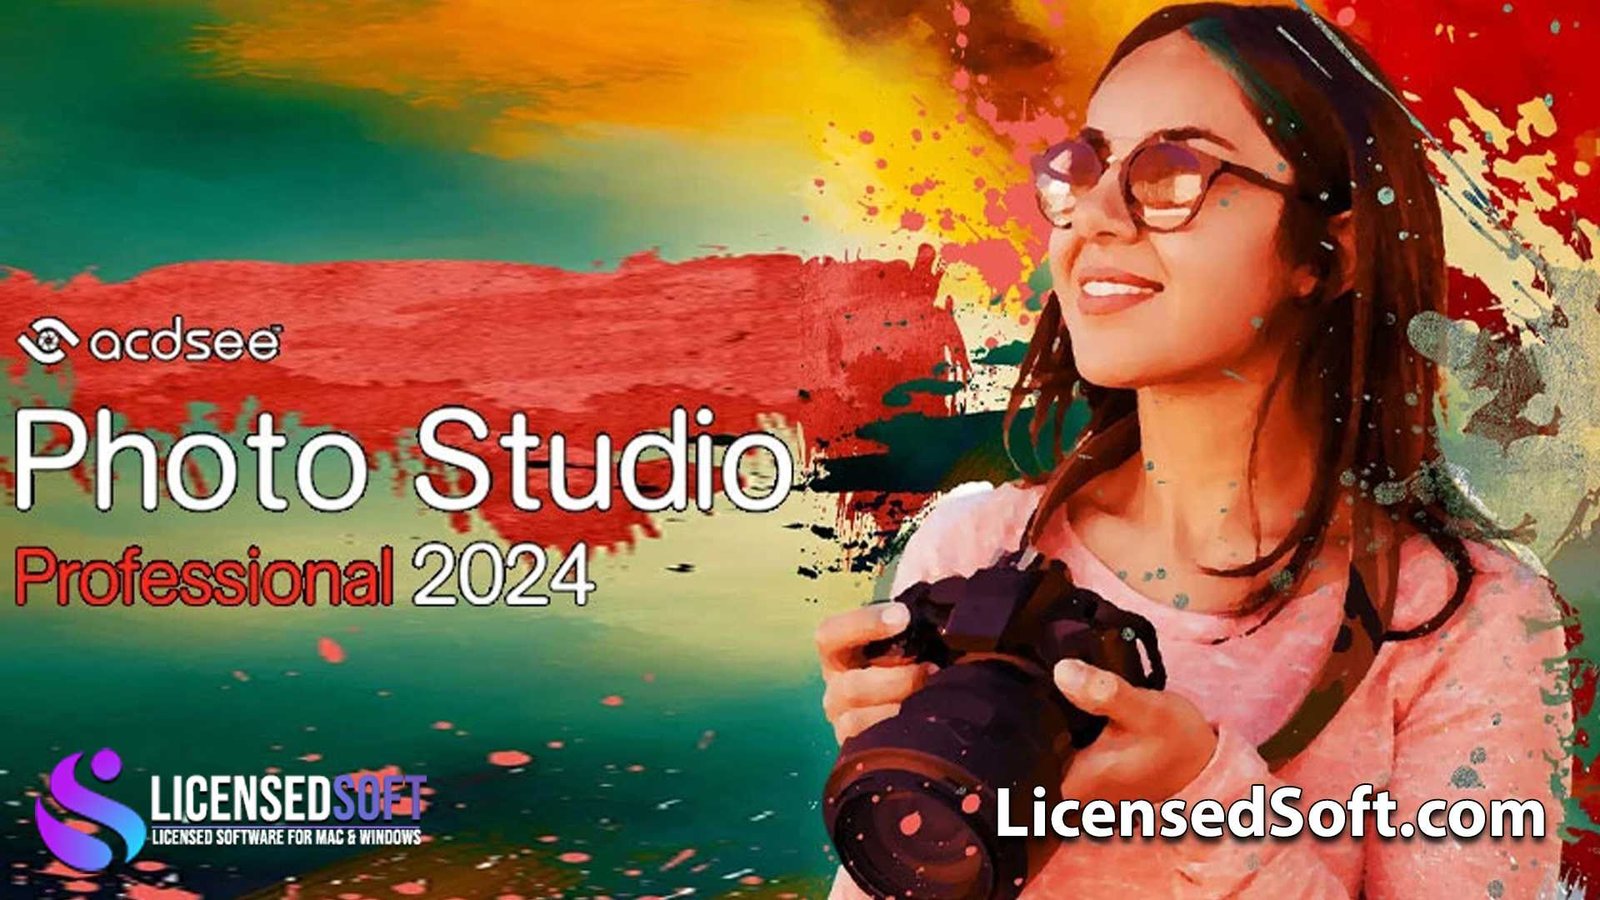 ACDSee Photo Studio Professional 2024 By LicensedSoft